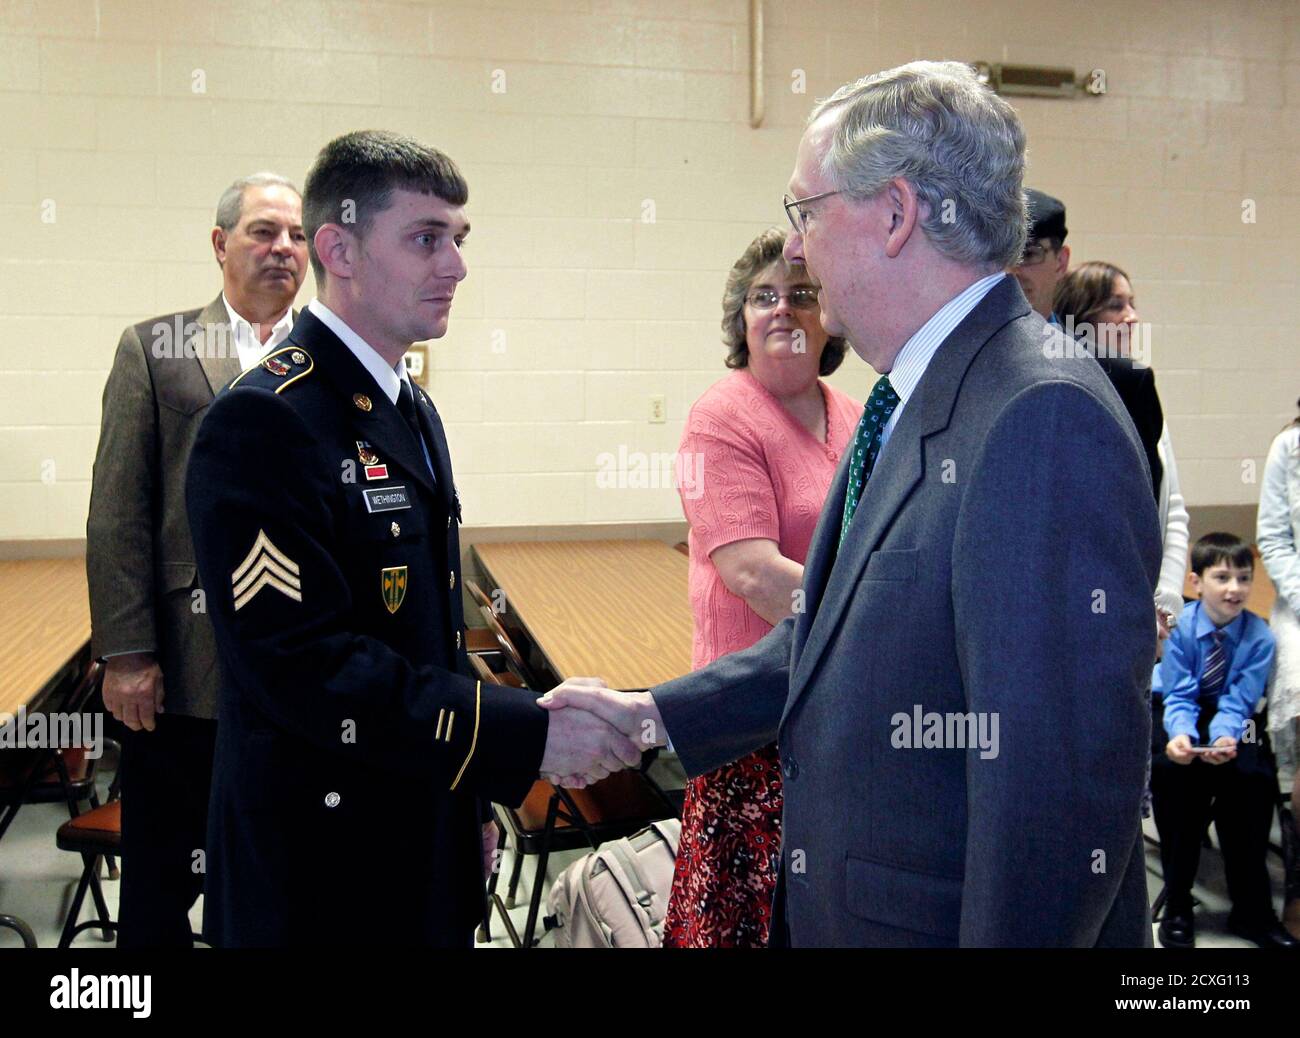 Sen. Mitch McConnell (R-KY) shakes hands with Kentucky National Guard Sgt. Jesse Wethington of 623 Field Artillery before presenting him with a Purple Heart at the VFW Post 1170 in Louisville, Kentucky, April 5, 2014.       REUTERS/John Sommers II     (UNITED STATES - Tags: POLITICS MILITARY) Stock Photo